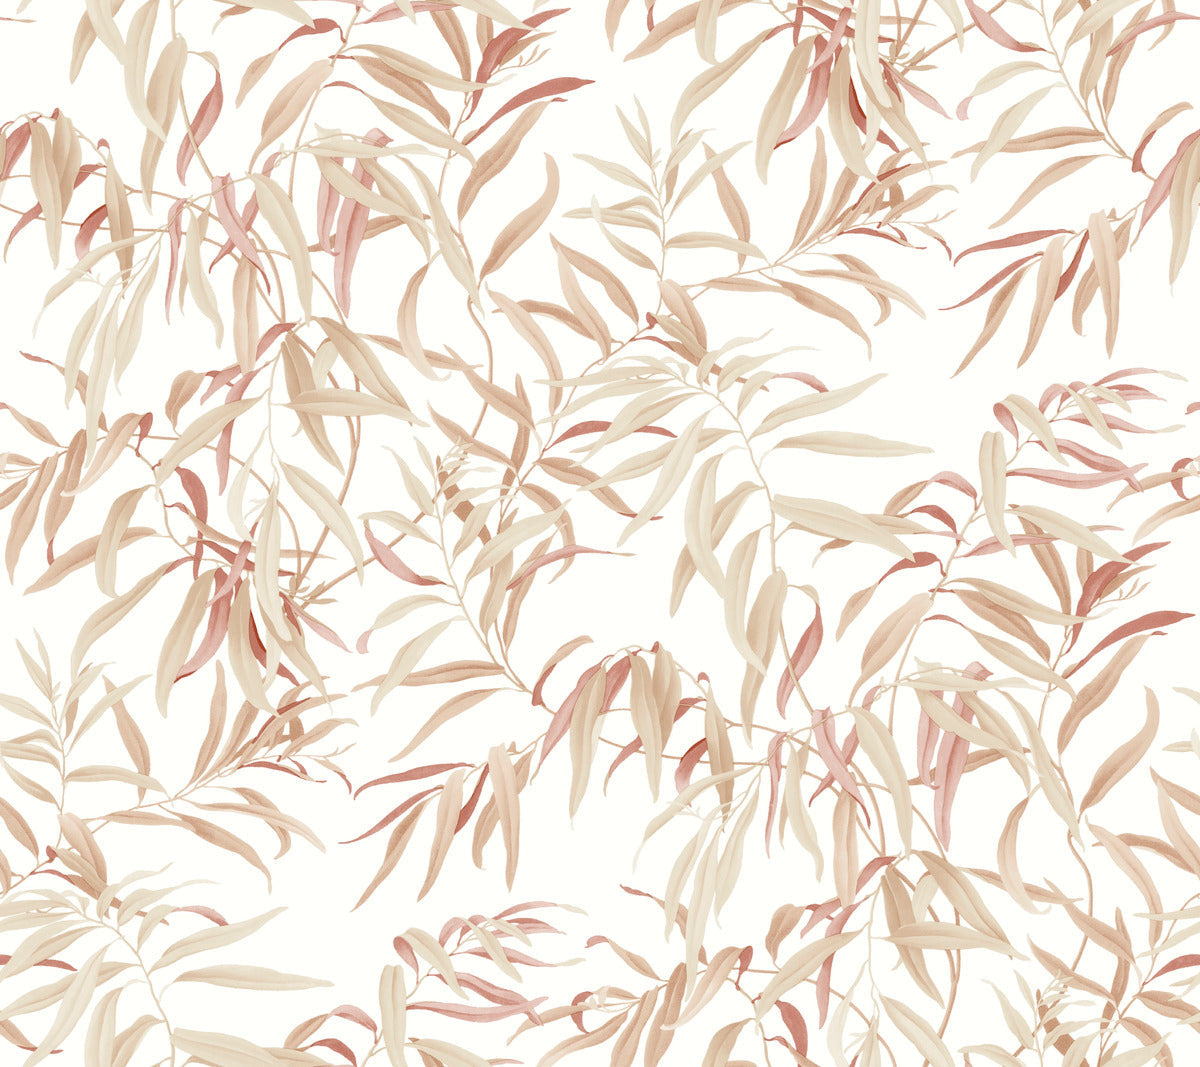 A seamless pattern featuring delicate, hand-drawn leaves in shades of beige, light brown, and soft pink against a white background. This York Wallcoverings Willow Grove Clay Wallpaper Pink (60 Sq.Ft.) creates a gentle, natural aesthetic suitable for a botanical retreat or fabric designs.